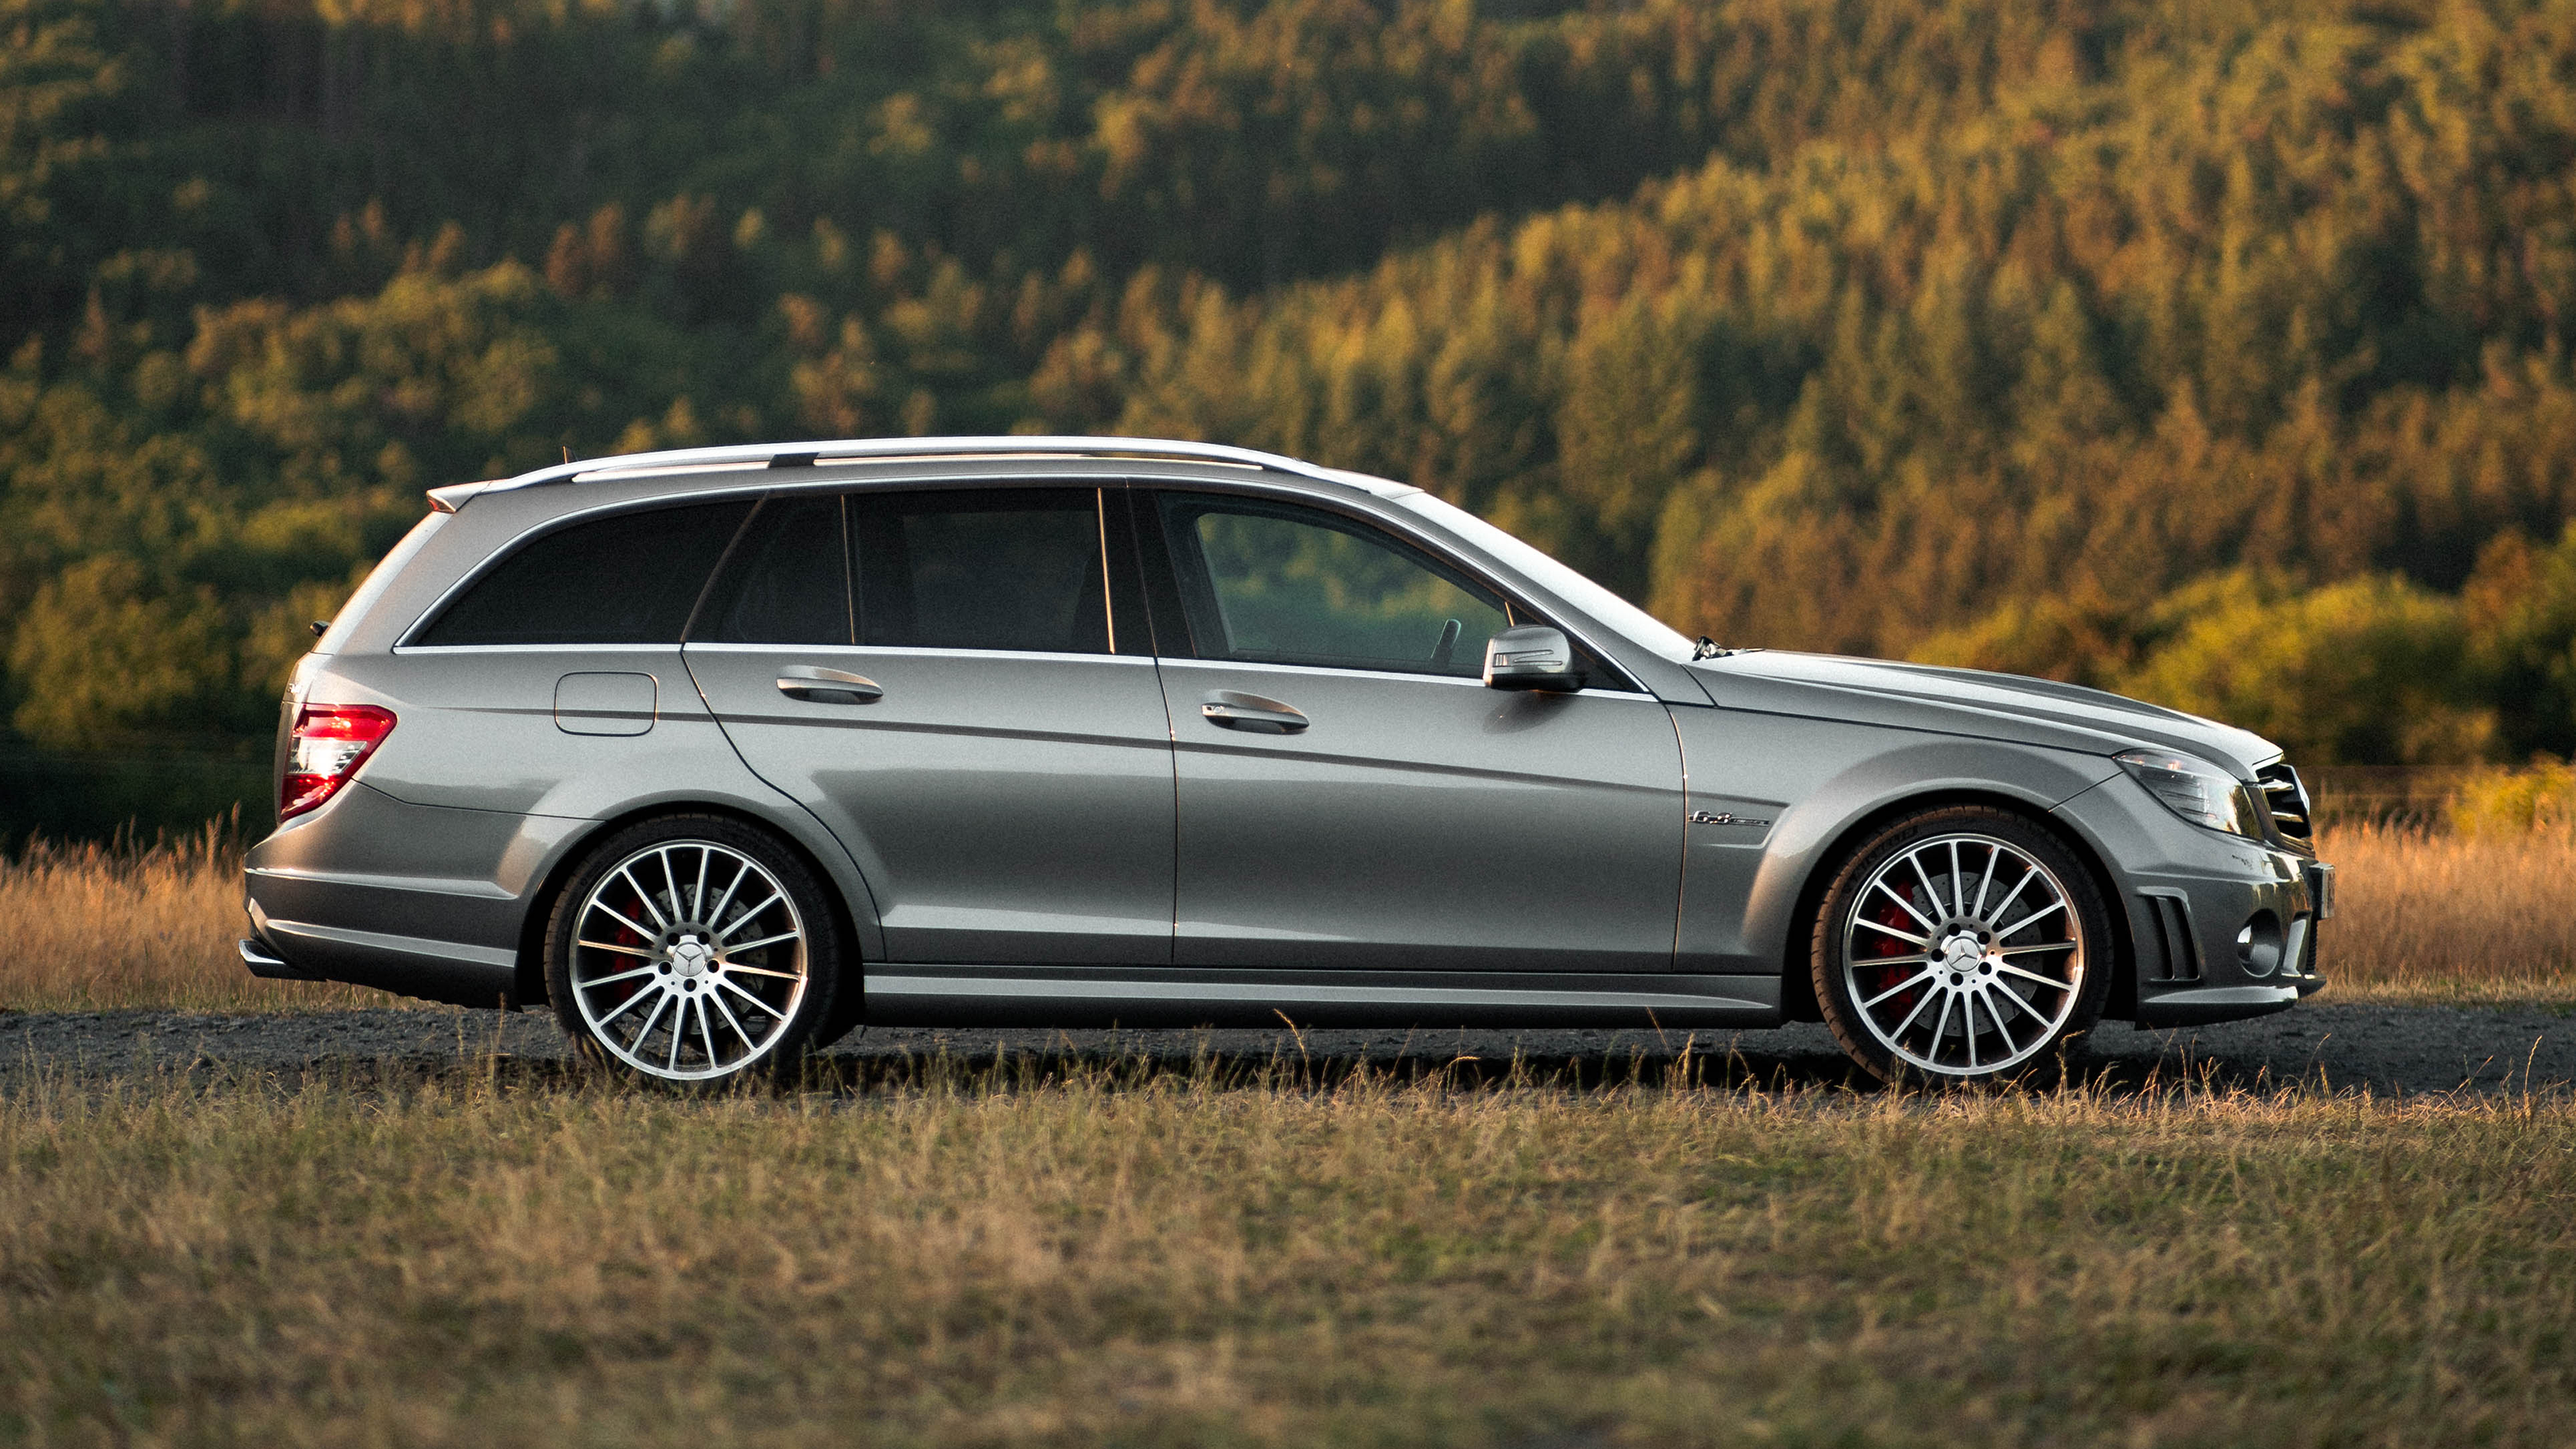 Mercedes-Benz C63 AMG (W204, 2008-2014): review, specs and buying